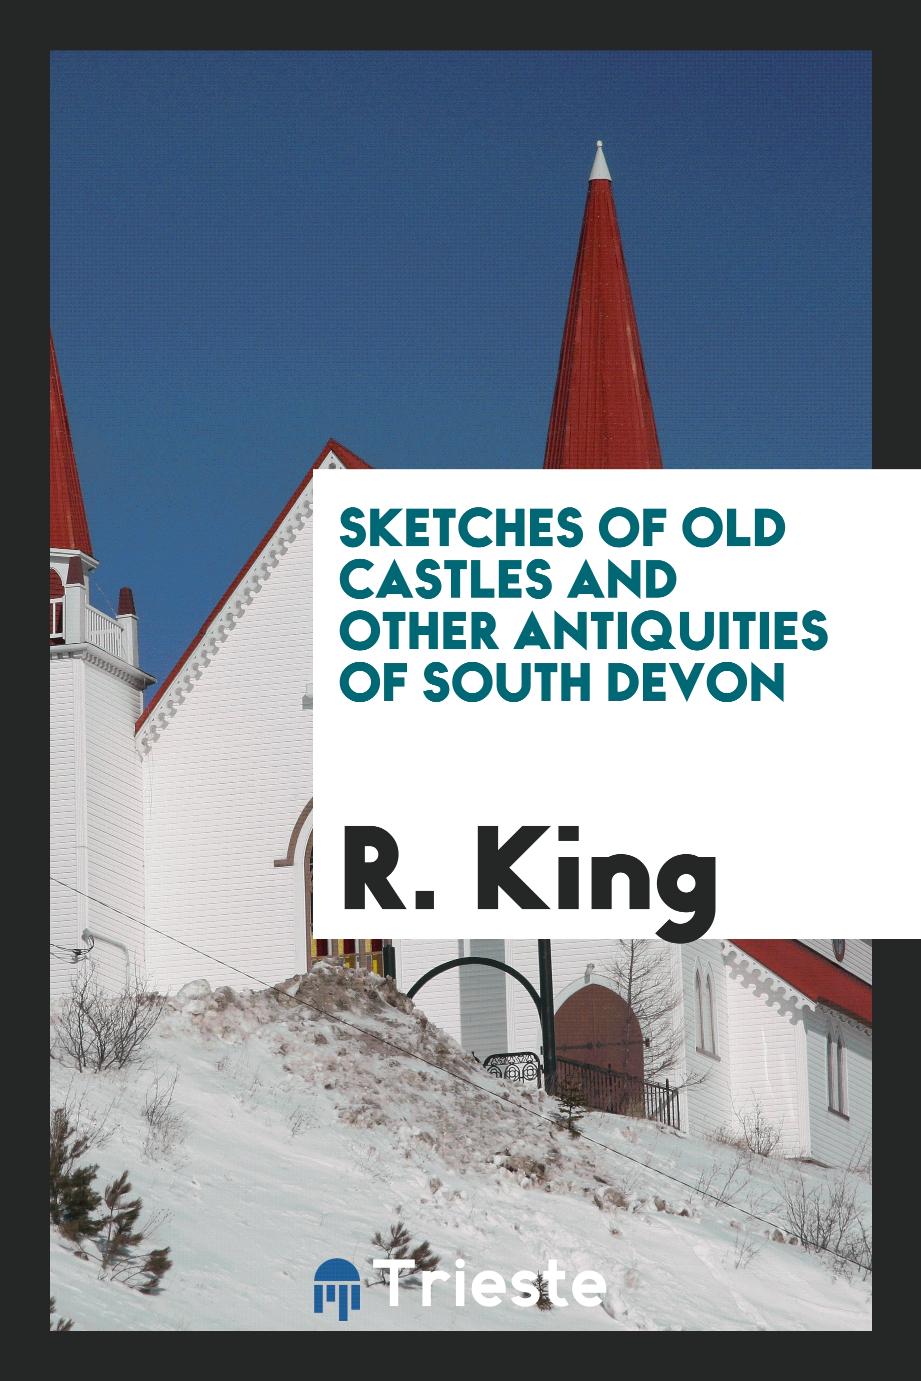 Sketches of old castles and other antiquities of South Devon